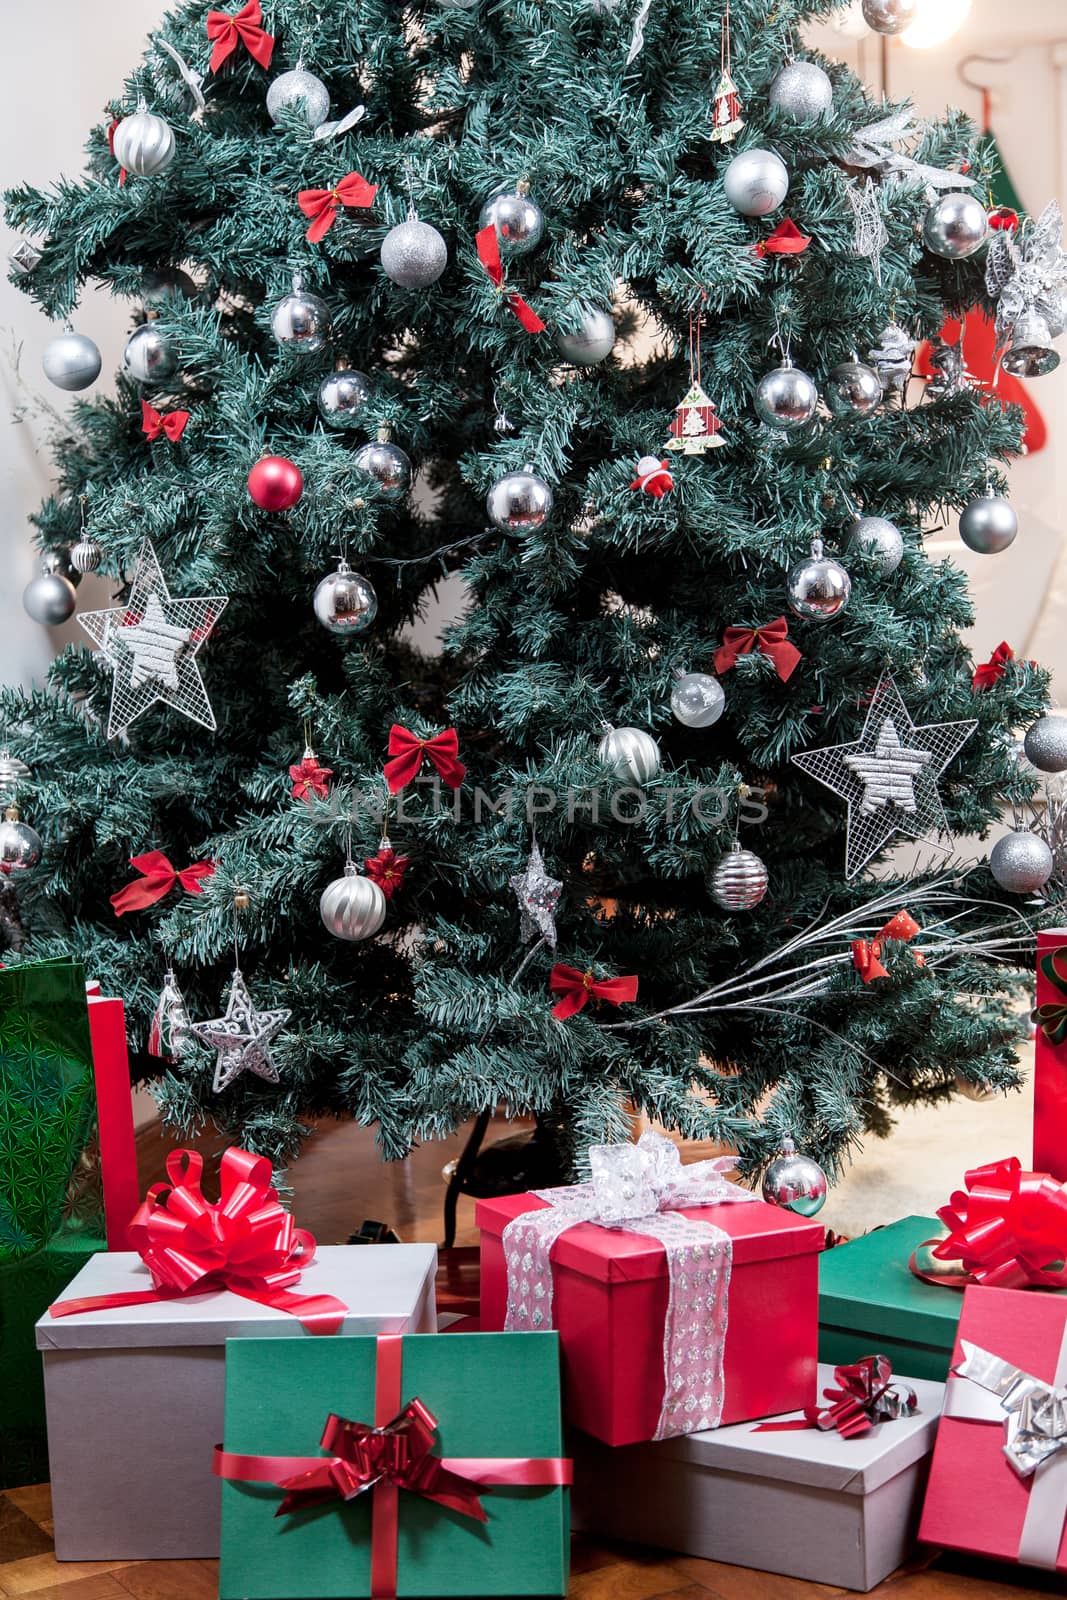 ball, beautiful, bow, box, bun, celebrate, celebration, christmas, color, colorful, decorate, decoration, decorative, design, elegant, evergreen, festive, floor, gift, gifts, gold, green, holiday, home, house, merry, model, pine, present, property, red, release, ribbon, traditional, tree, white, winter, wrap, xmas, vertical, silver